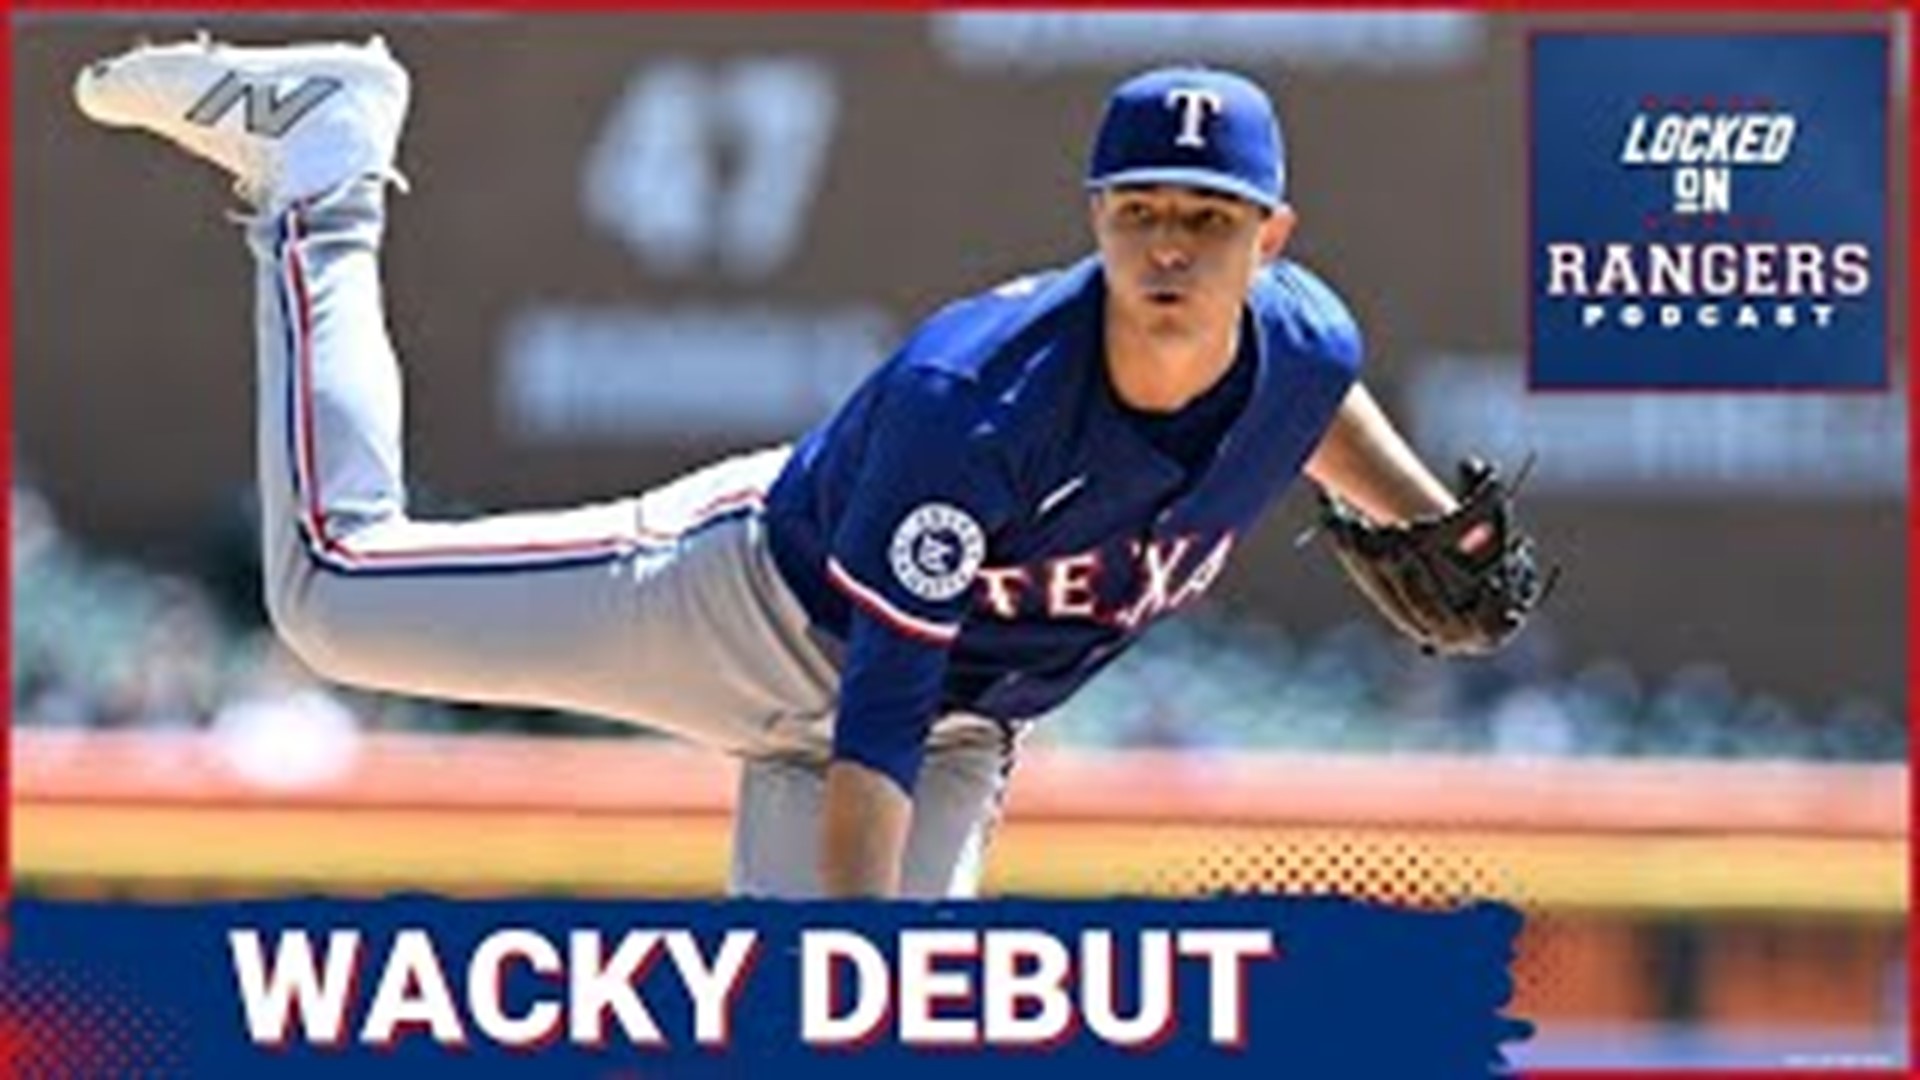 Texas Rangers rookie Jack Leiter made his MLB debut against the Detroit Tigers and showed moments of brilliance and badness in a wild win.